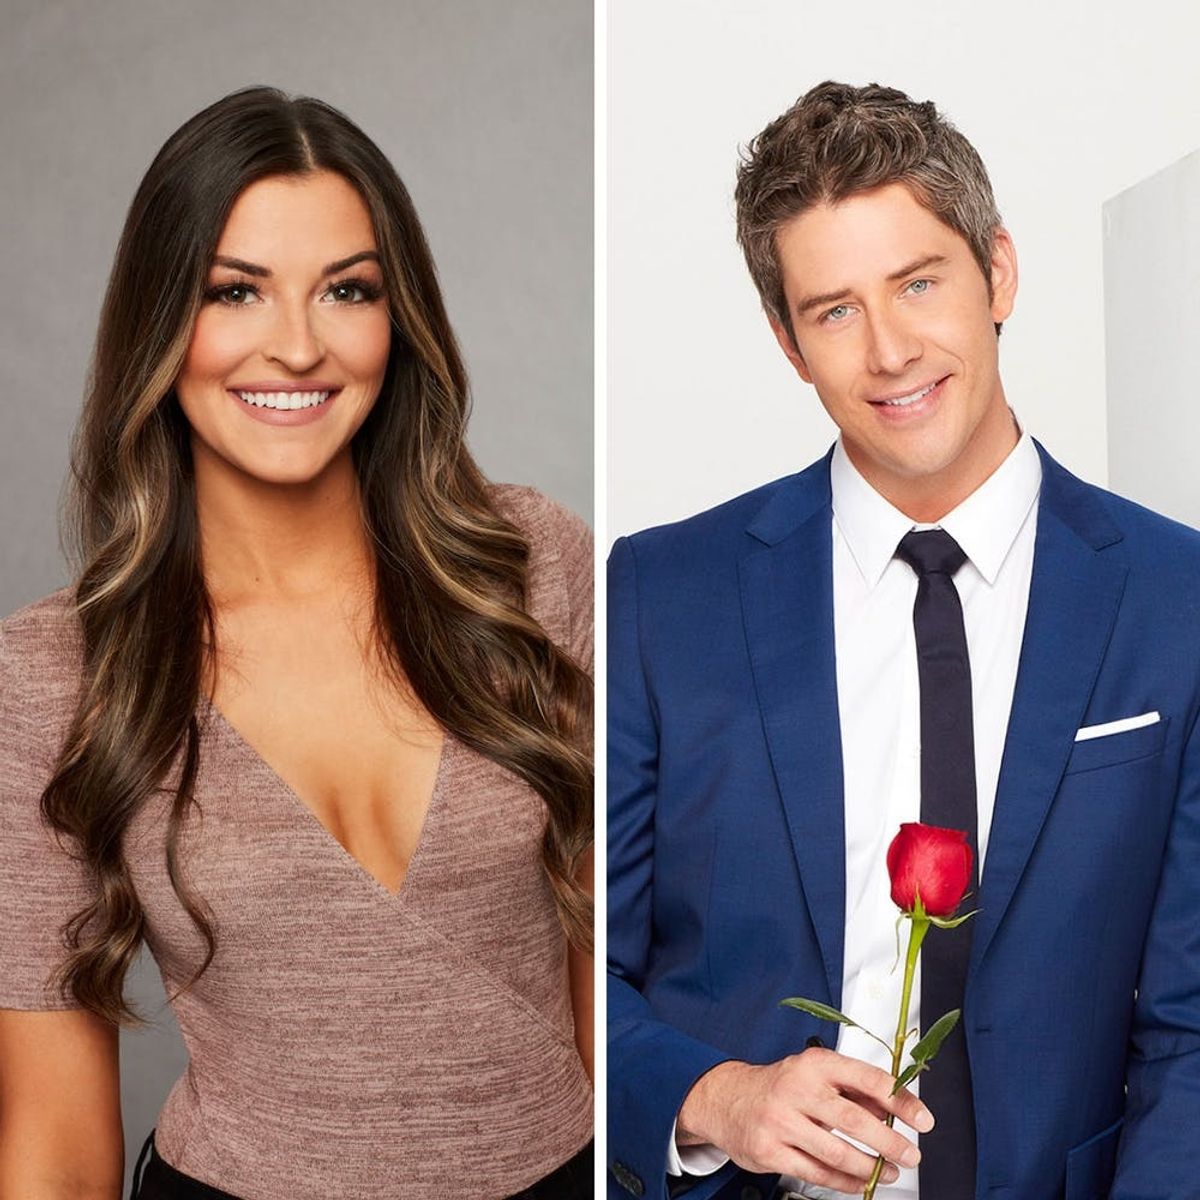 Tia Booth and Arie Luyendyk Jr. Met Up With Another ‘Bachelor’ Couple During Her Hometown Date